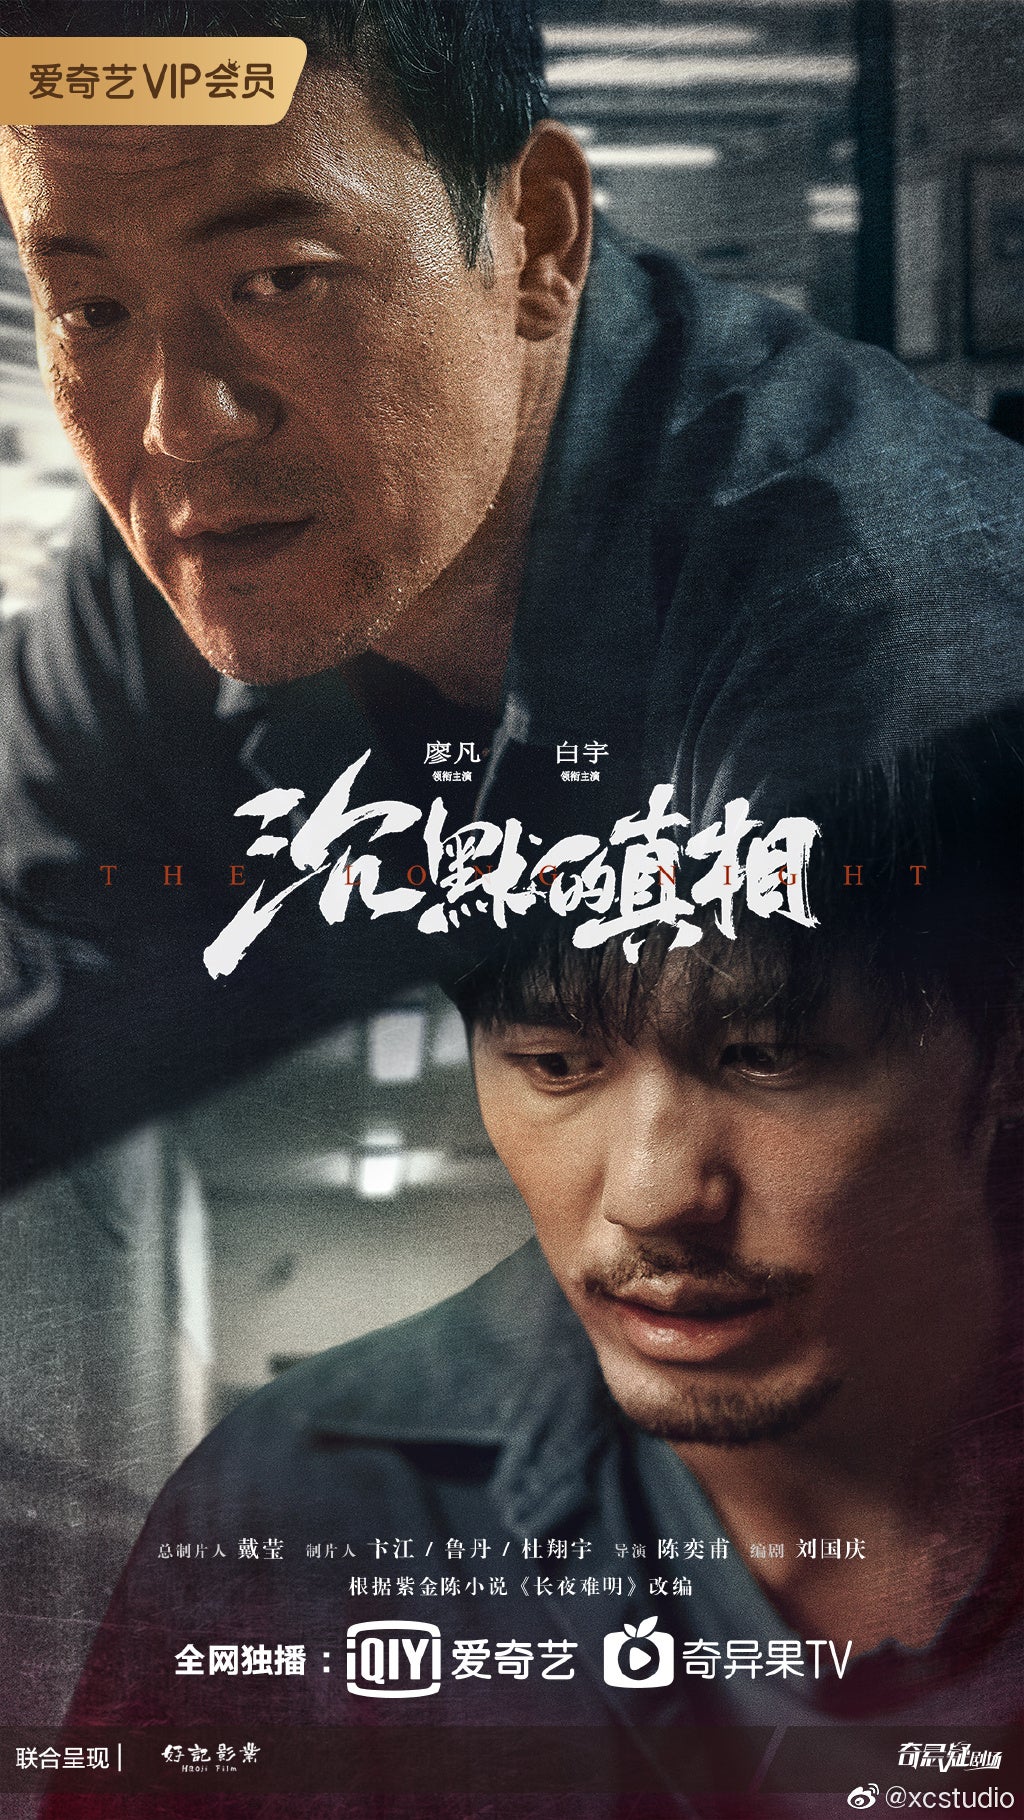 TV ratings for The Long Night(沉默的真相) in Sweden. iqiyi TV series